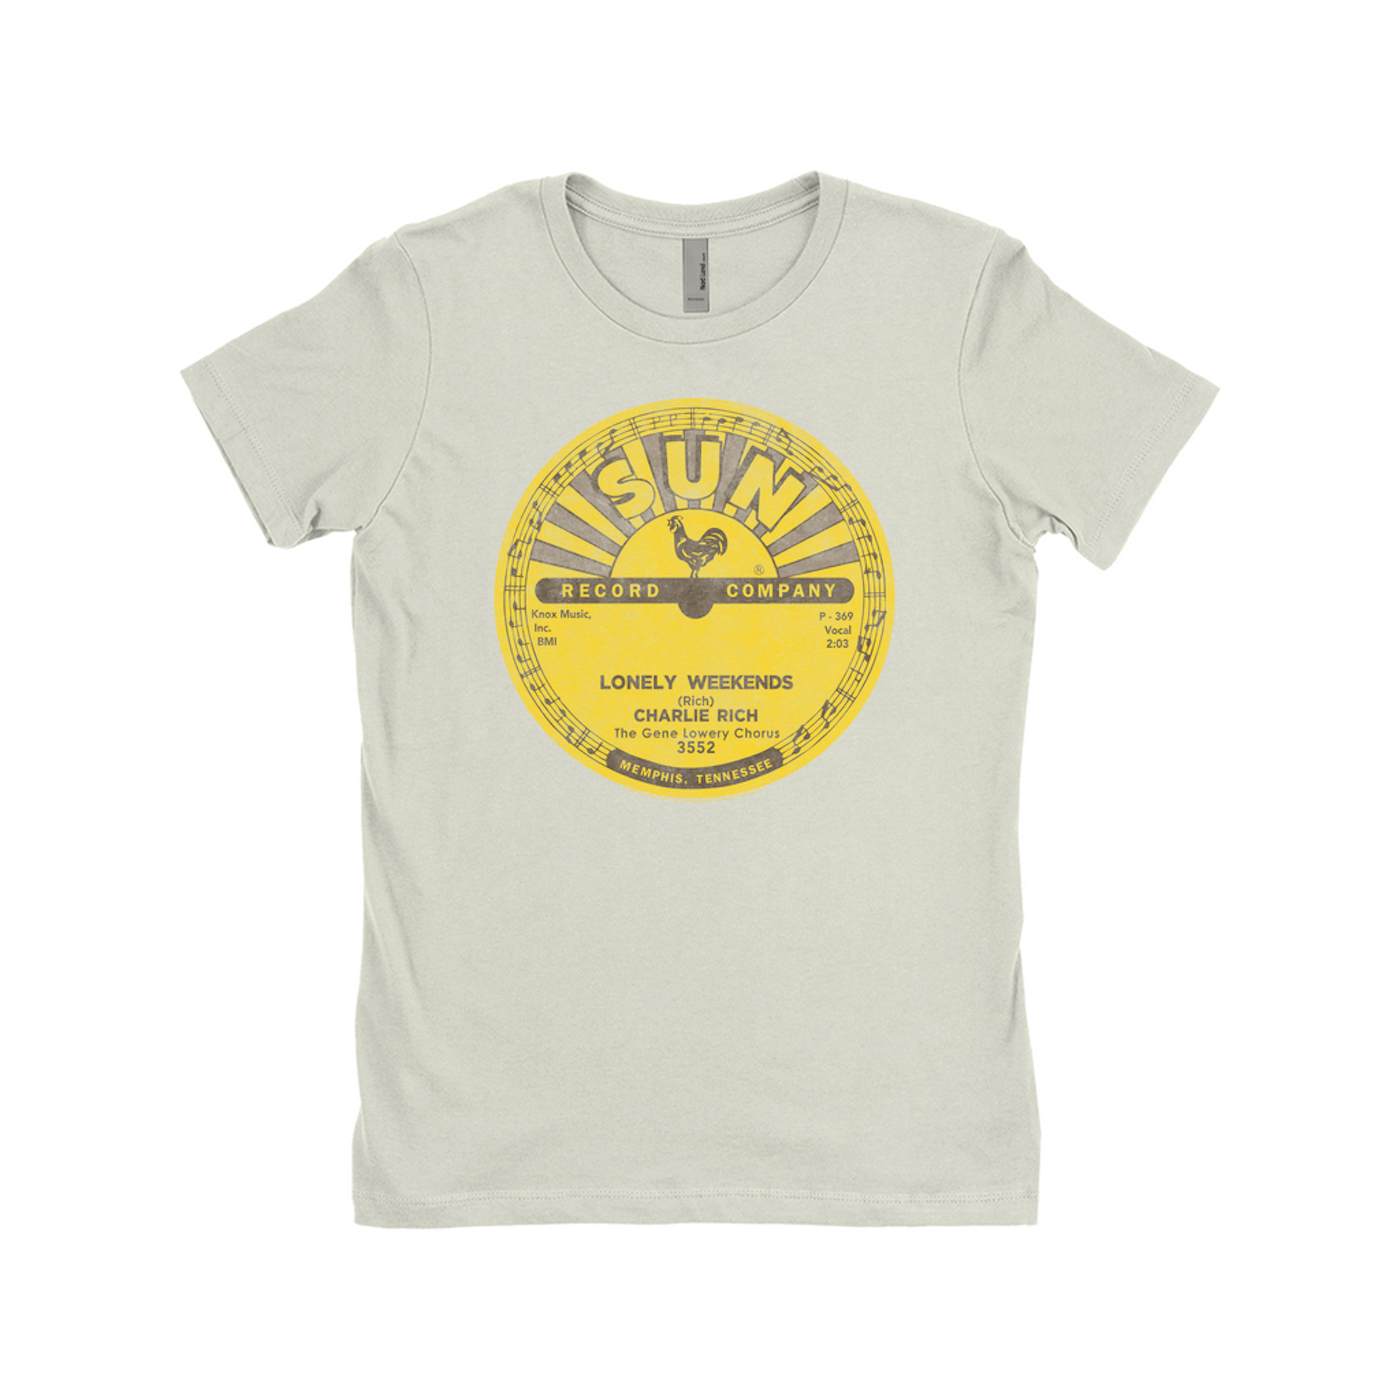 Charlie Rich Ladies' Boyfriend T-Shirt | Lonely Weekends Record Label Distressed Charlie Rich Shirt